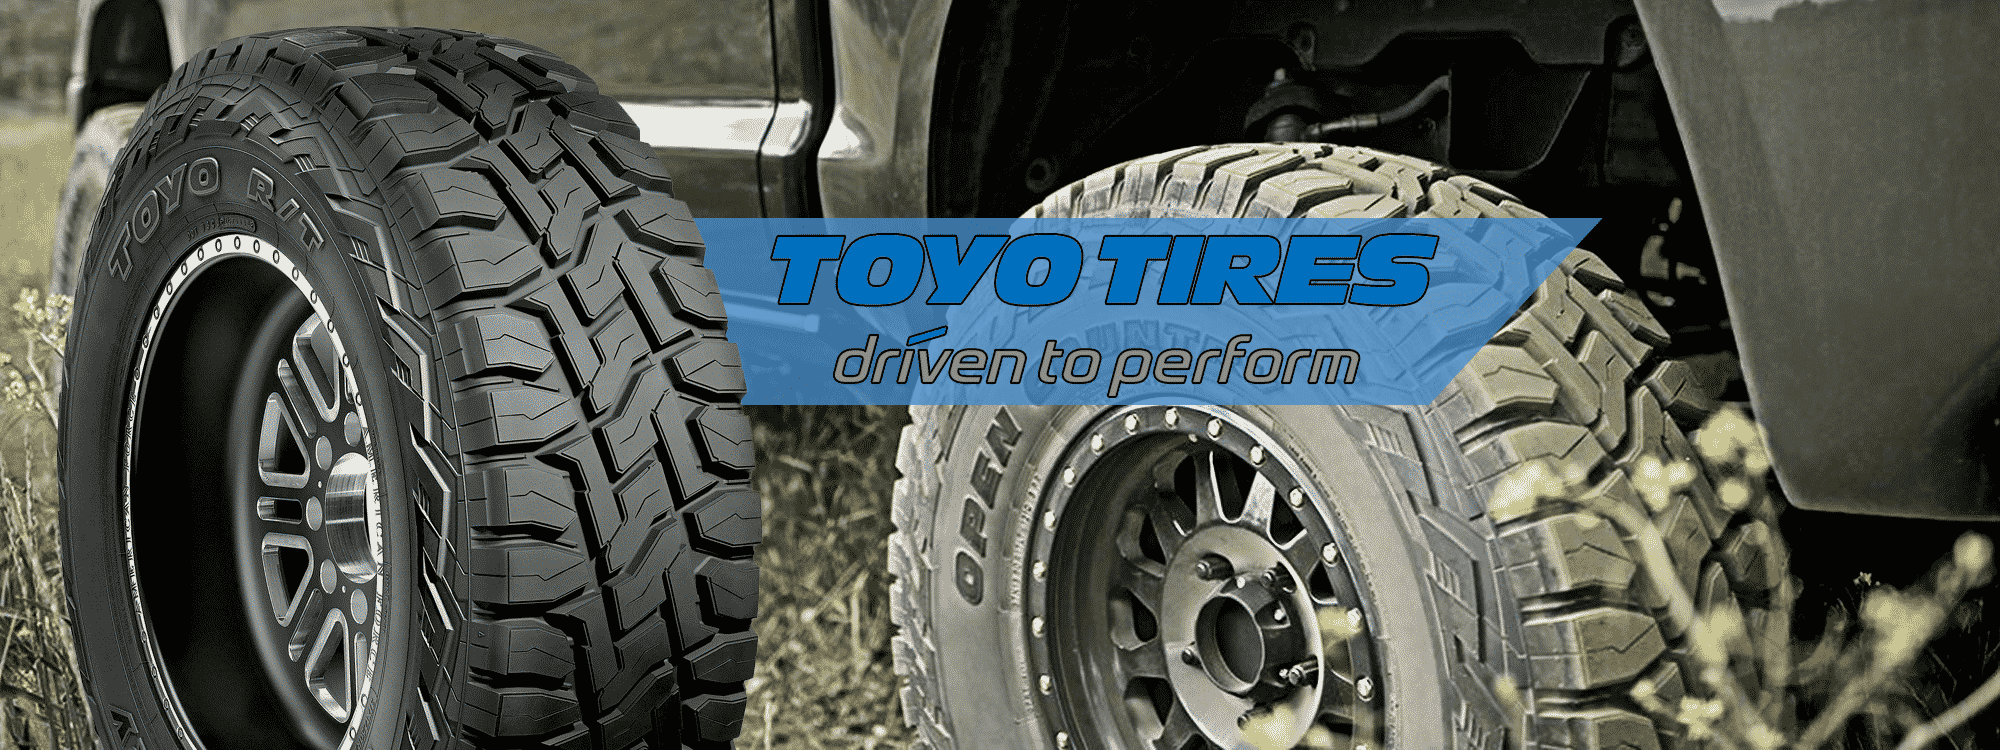 Two off-the-road-tires, one clean and one dirty, from East Bay Tire